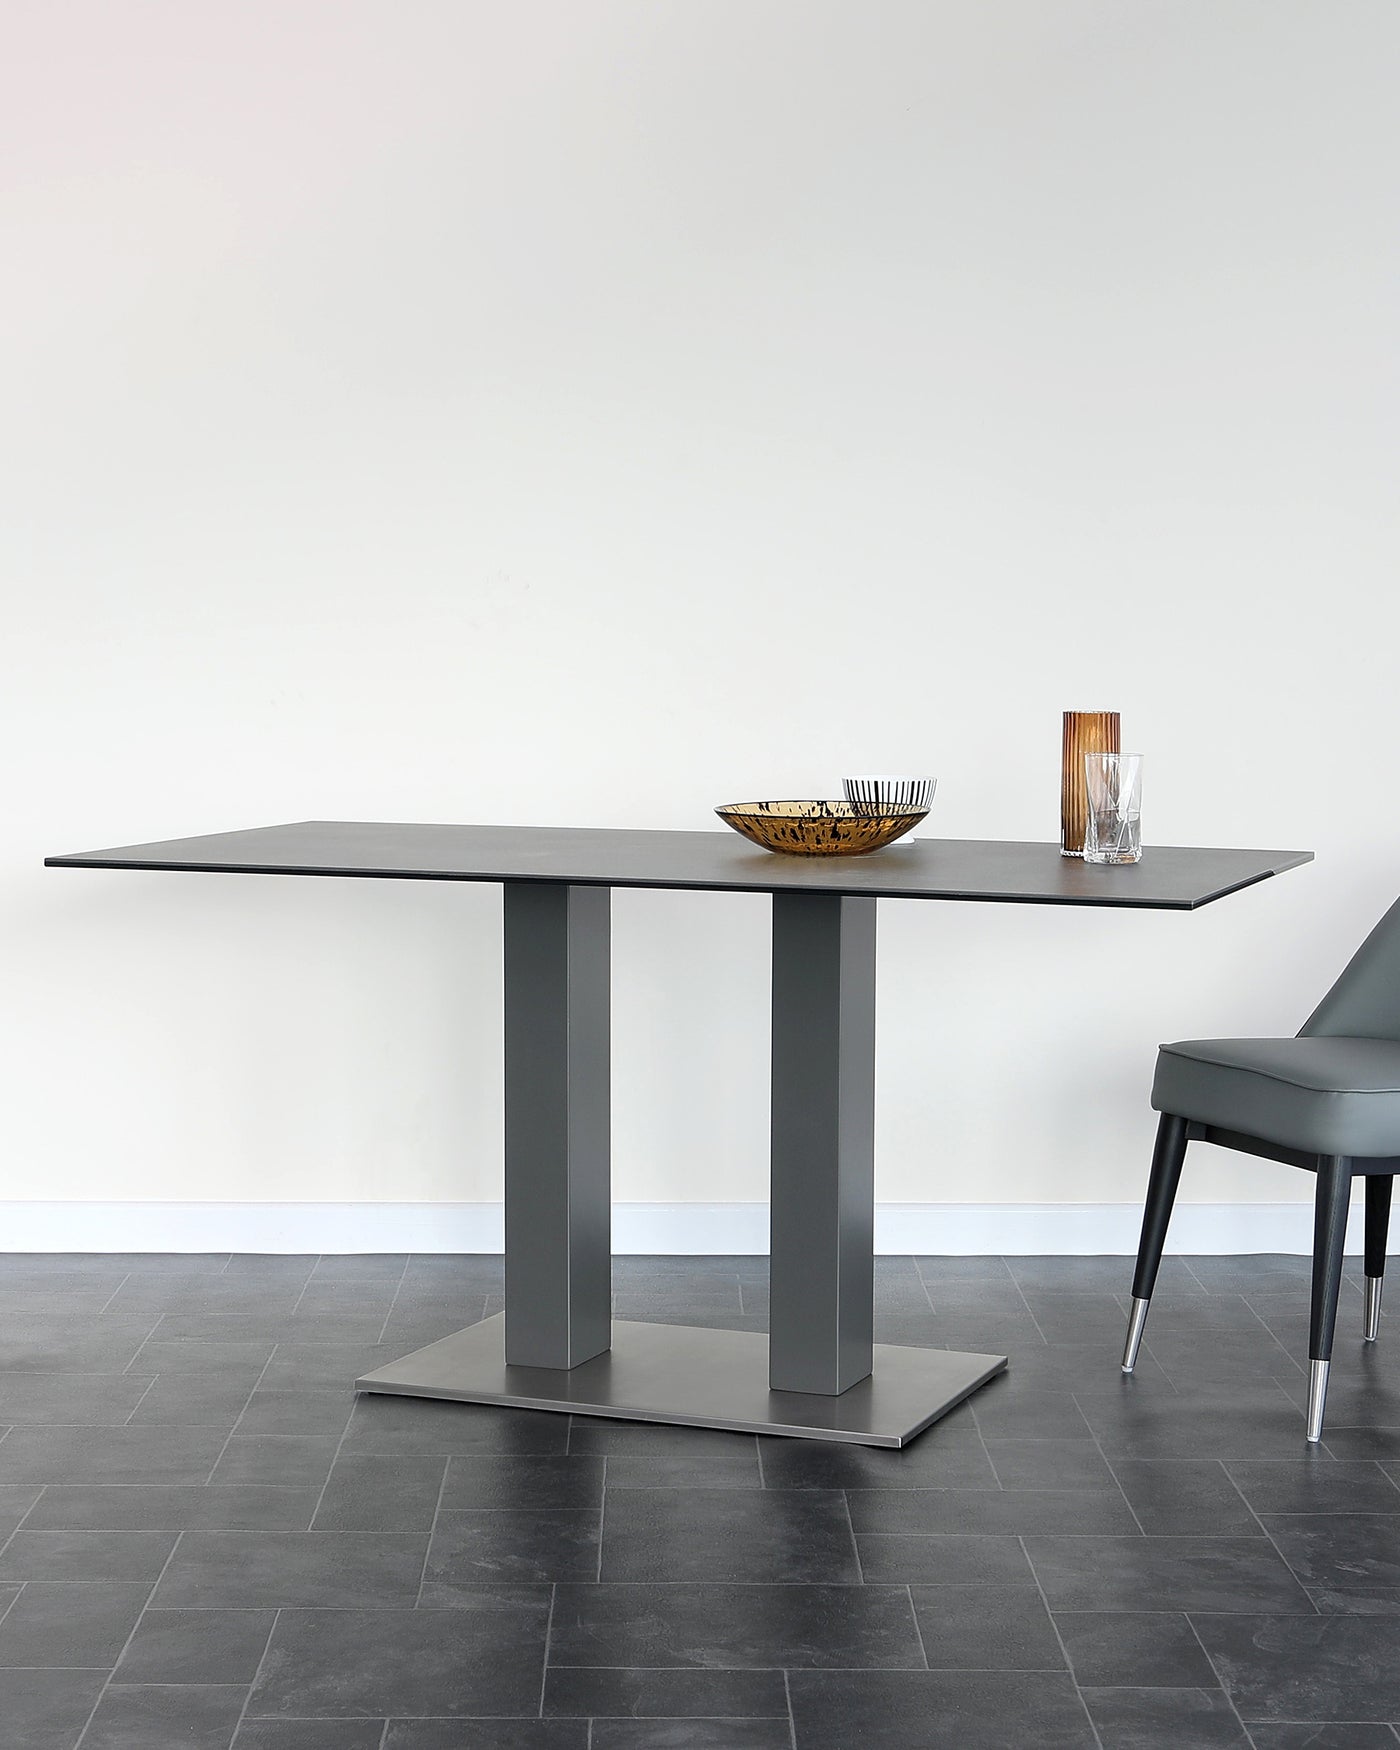 Modern minimalist dining set featuring a rectangular table with a flat, sleek surface and twin pedestal base in a matte grey finish. A single grey upholstered chair with a cantilever design and metal legs is partially visible. The table is accessorized with a decorative bowl and two drinking glasses. The set is positioned on a dark tile floor against a white wall backdrop.